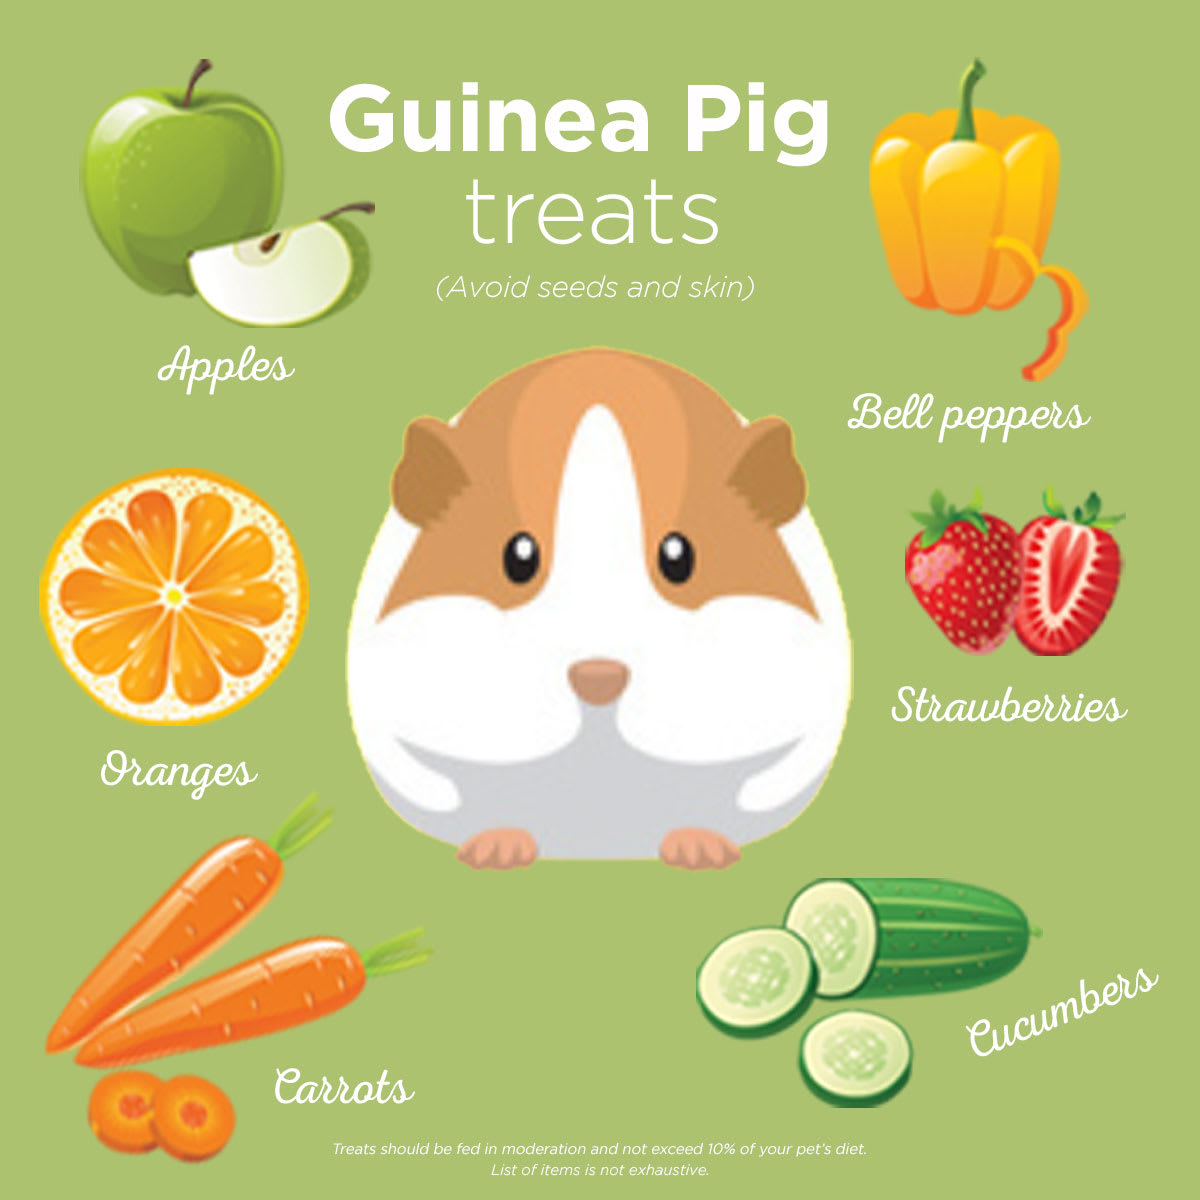 Do guinea pigs need water when eating vegetables?